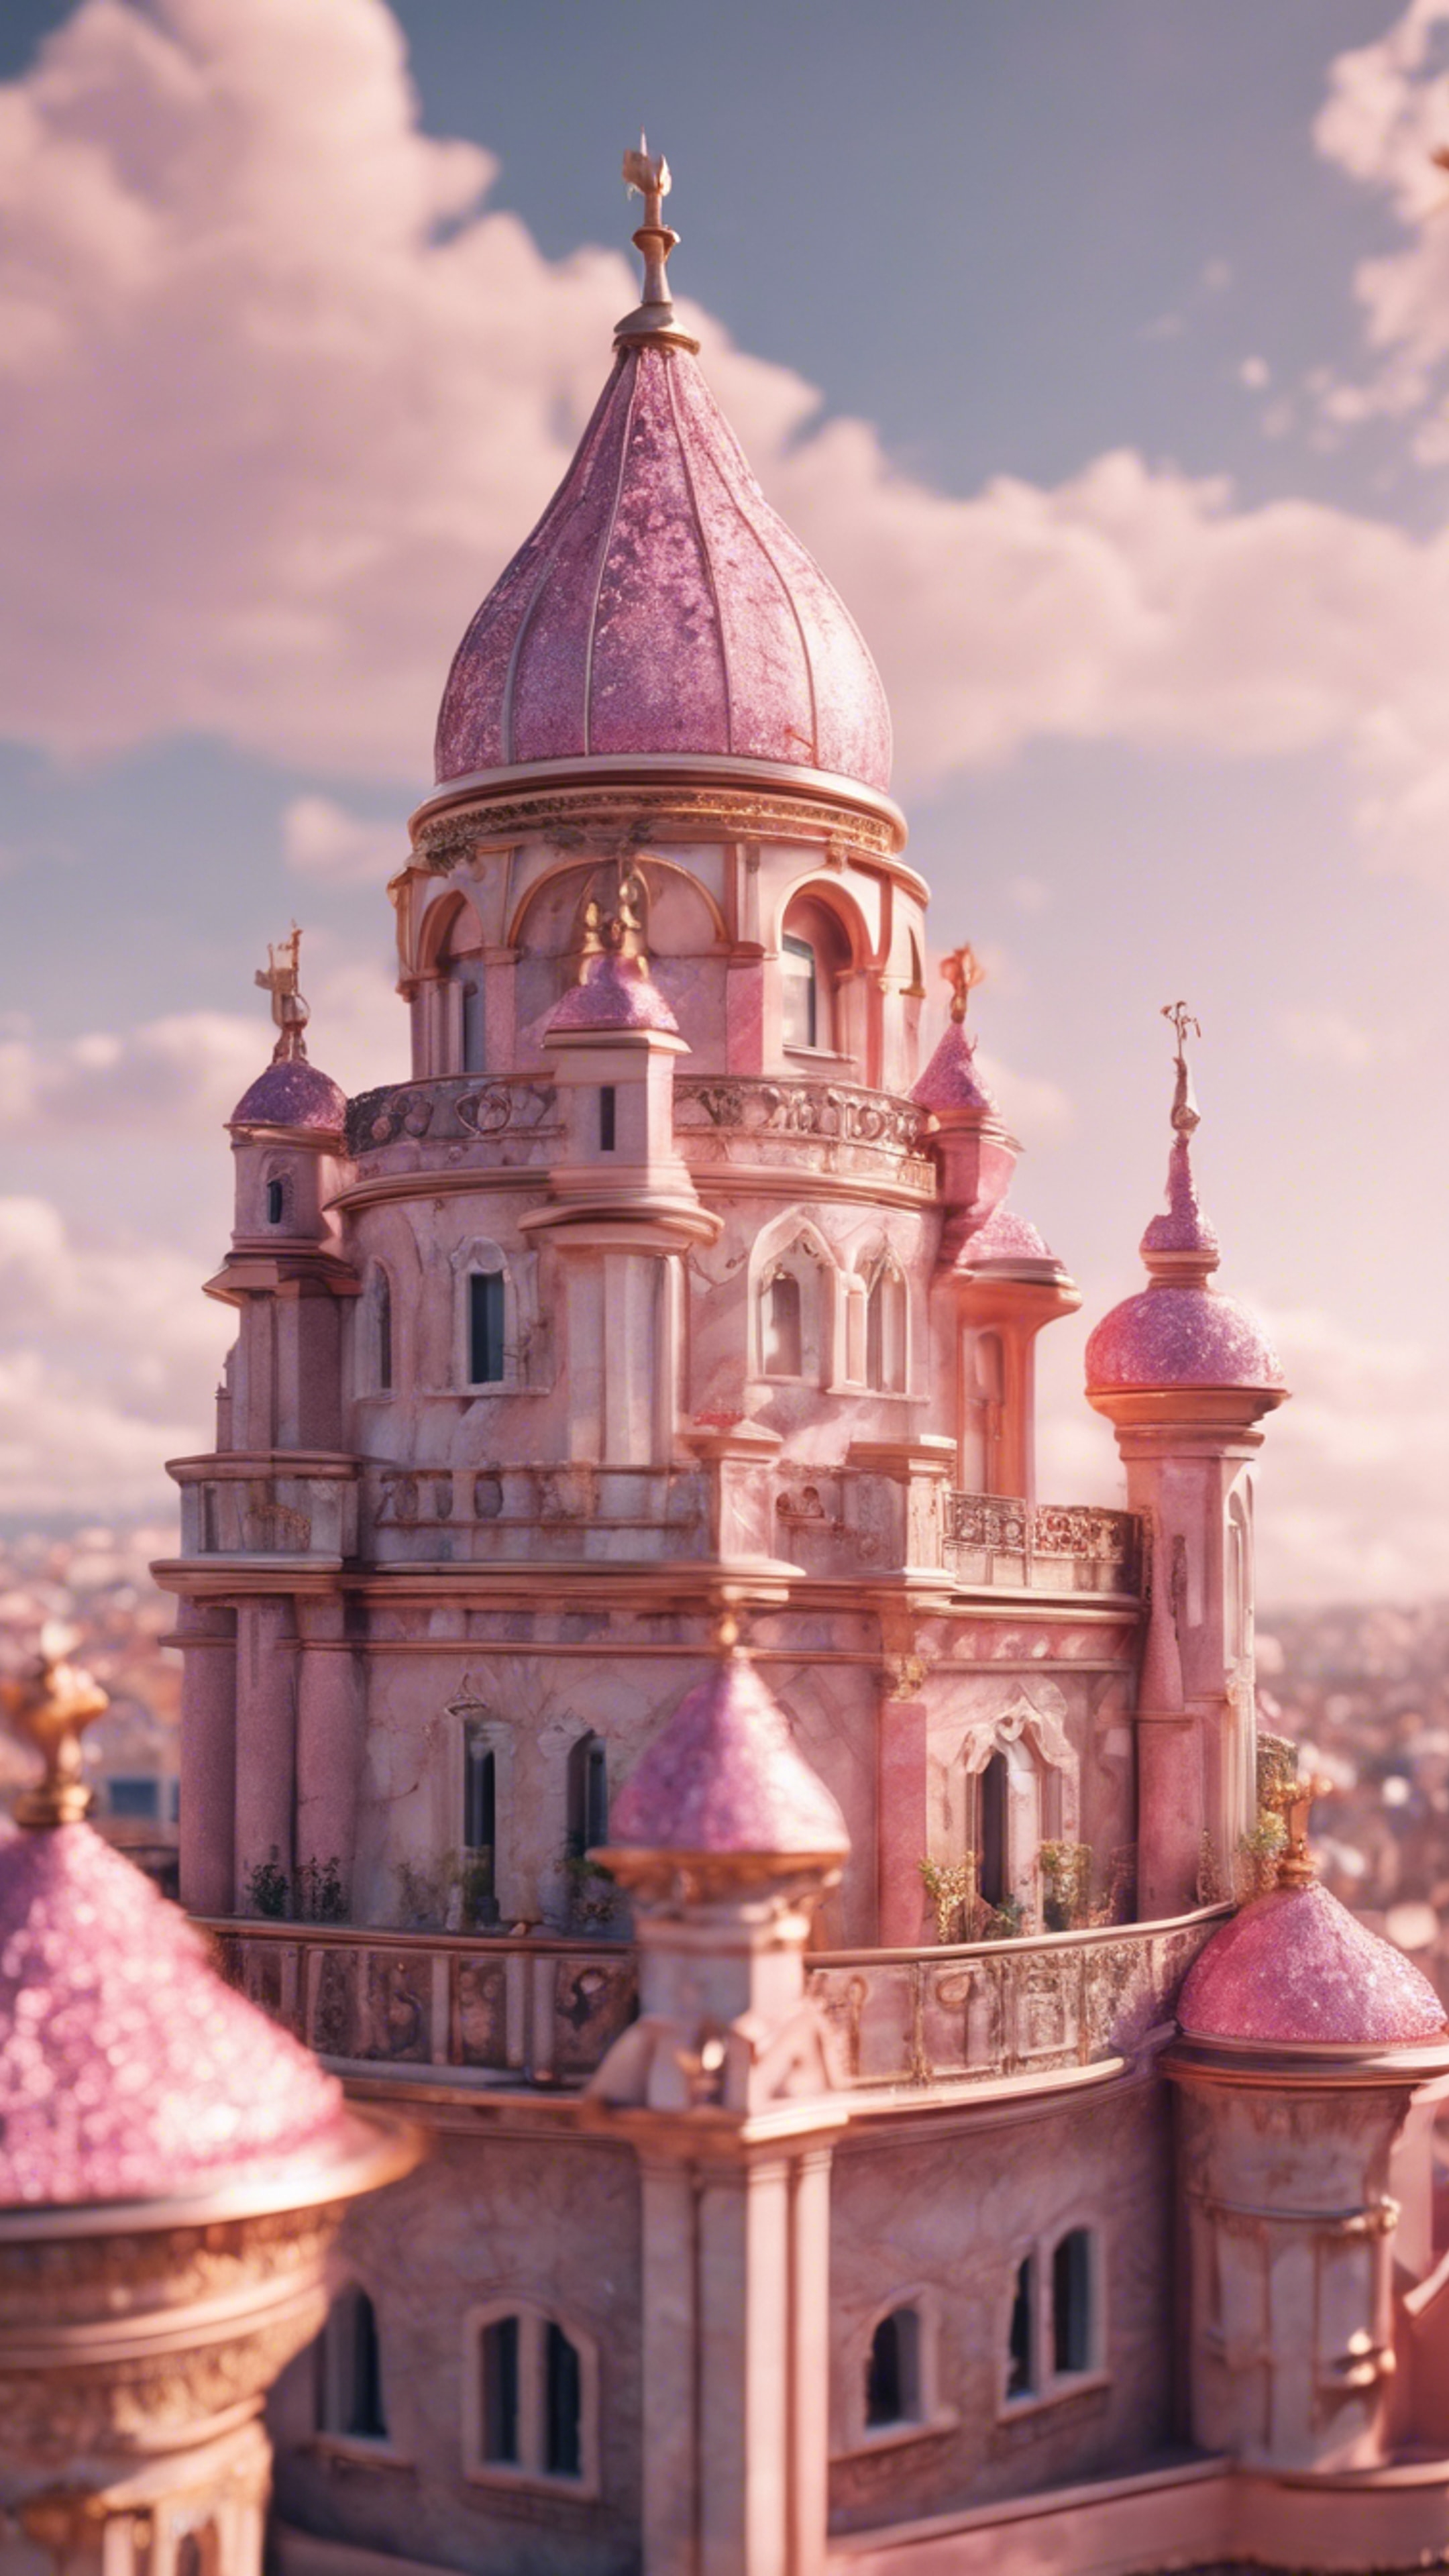 An ornate pink marble castle with glimmering golden rooftops during a sunny afternoon. Behang[39cdf807c12f4b9c8dd2]